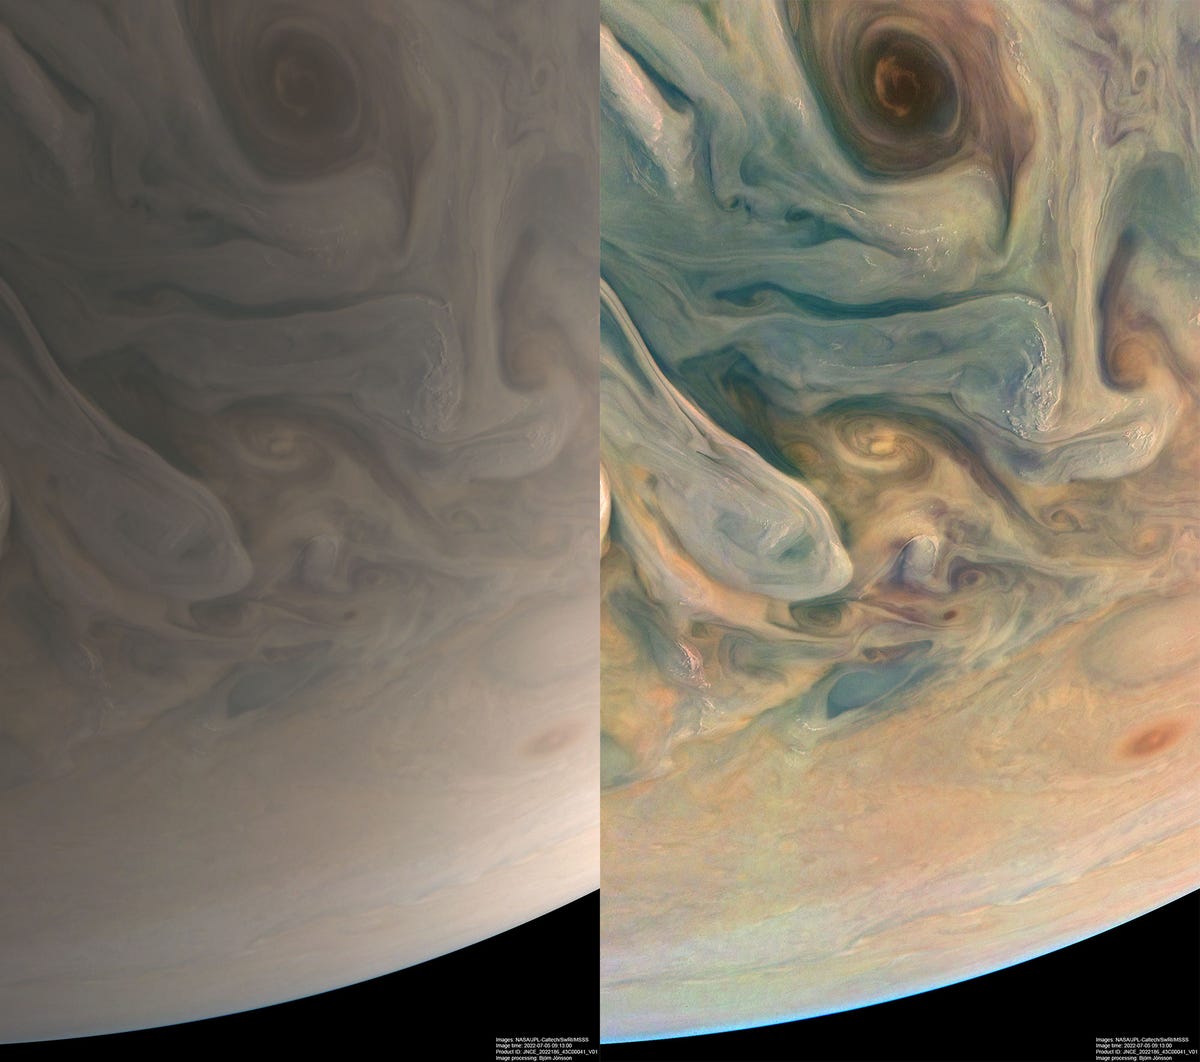 On the left is a soft beige version of Jupiter.  On the right is the same image, except for shades of blue, orange and yellow.